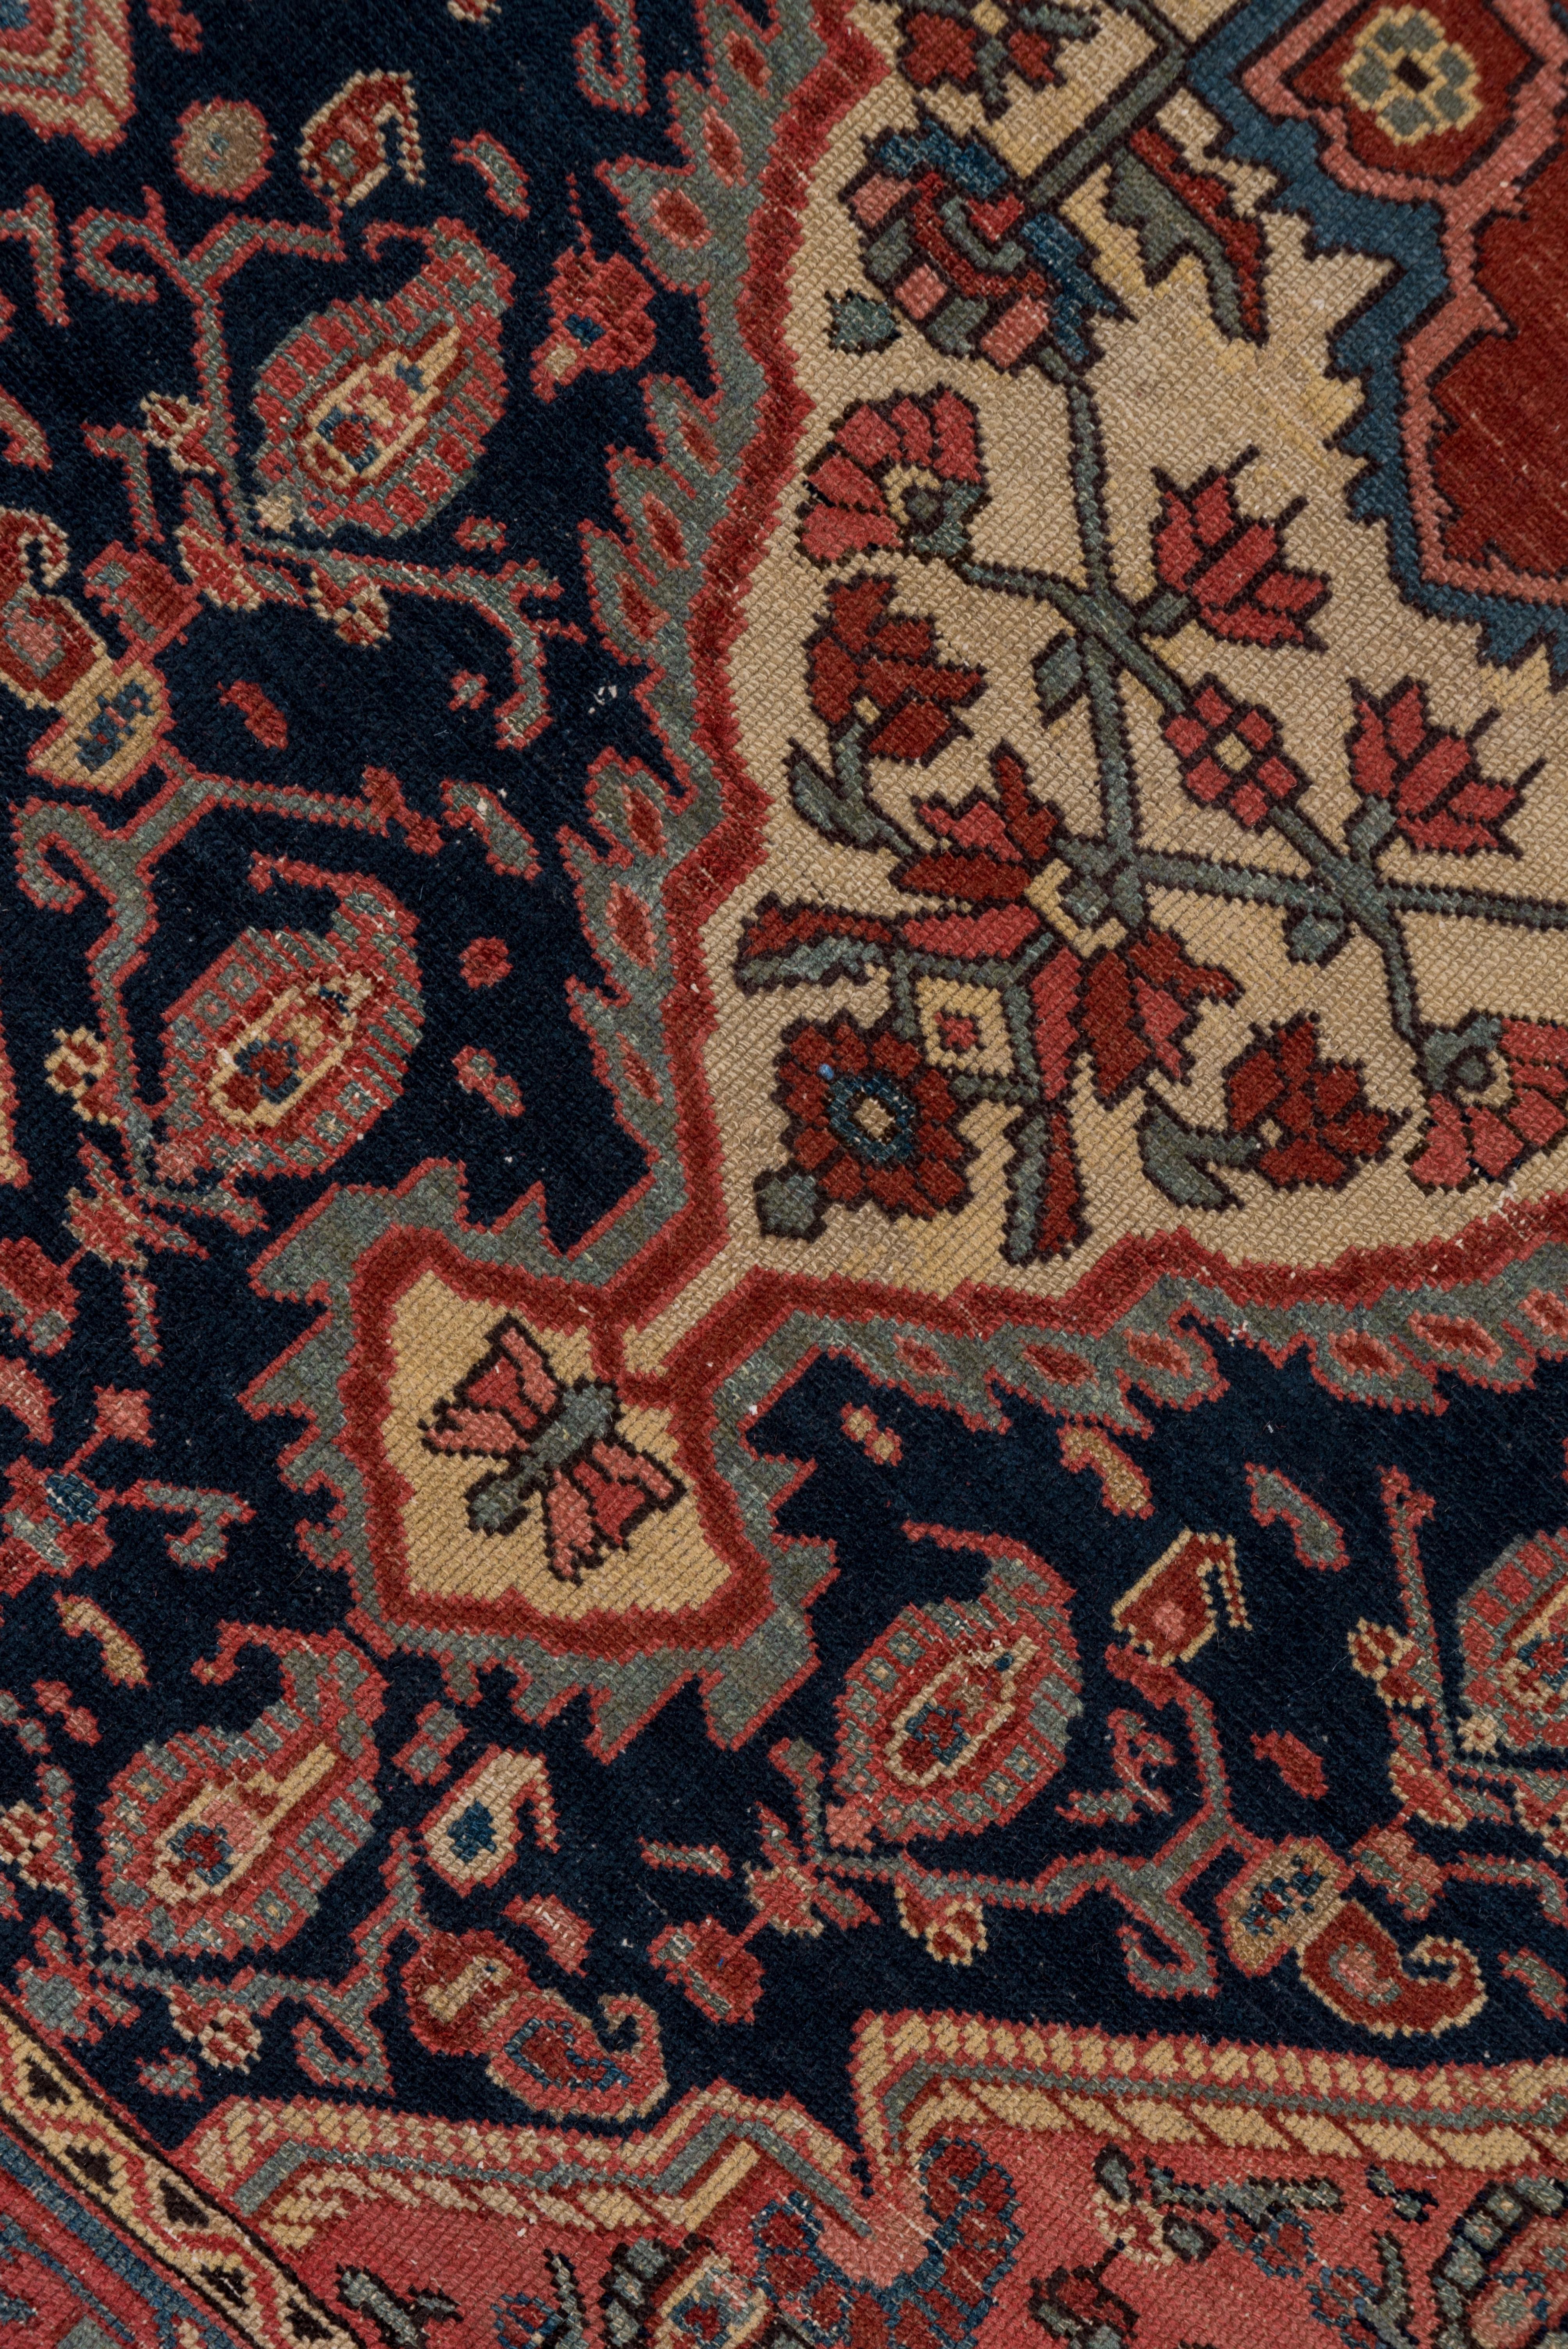 Early 20th Century 1900s Antique Persian Mishan Malayer Rug, Rose, Navy & Ivory Field, Blue Borders For Sale